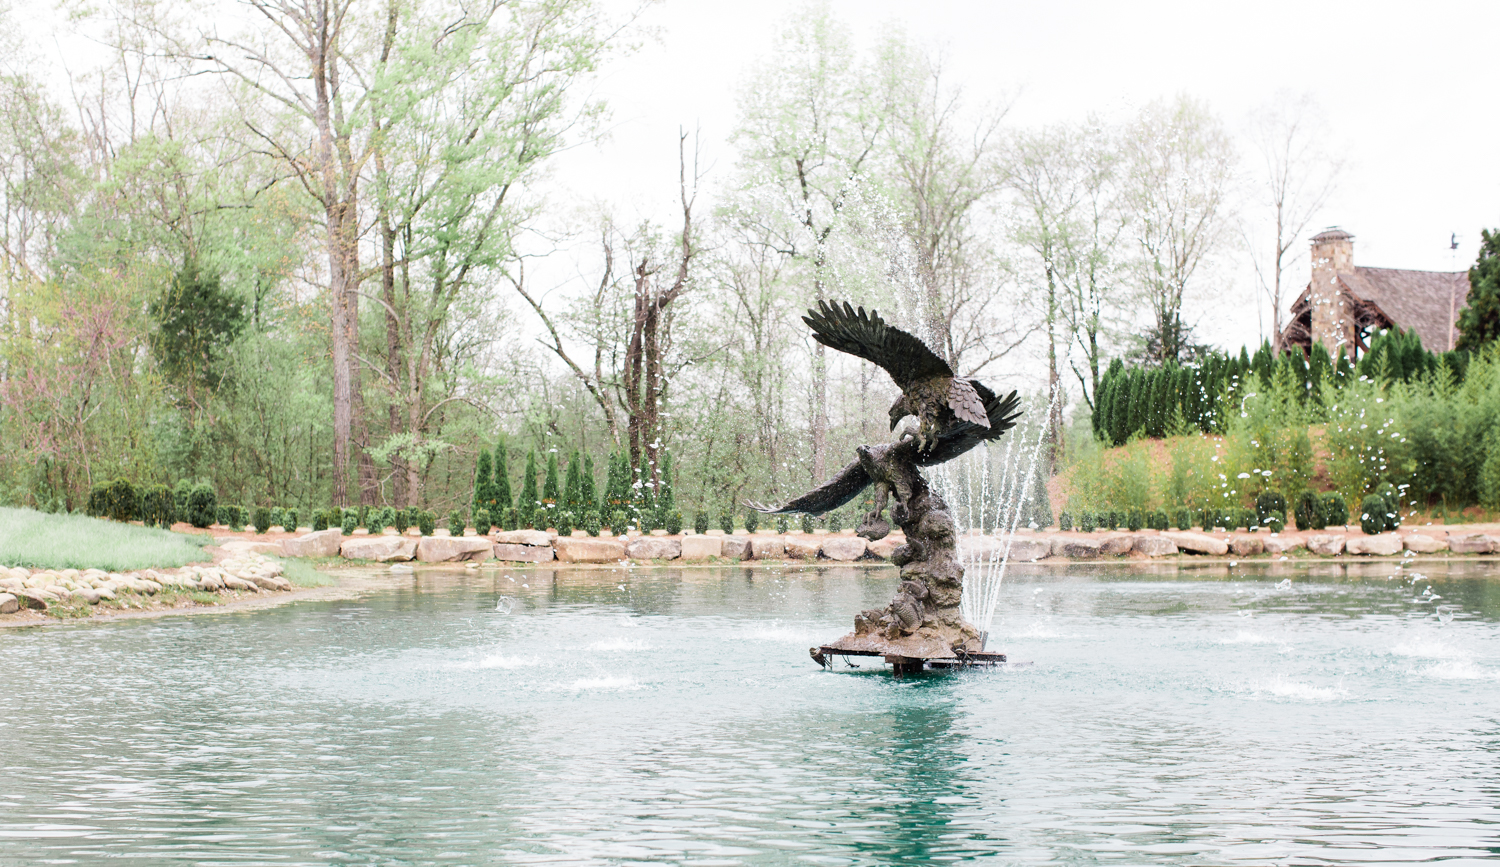 Eagles soar over this beautiful fountain at the entrance of 2400 on the river